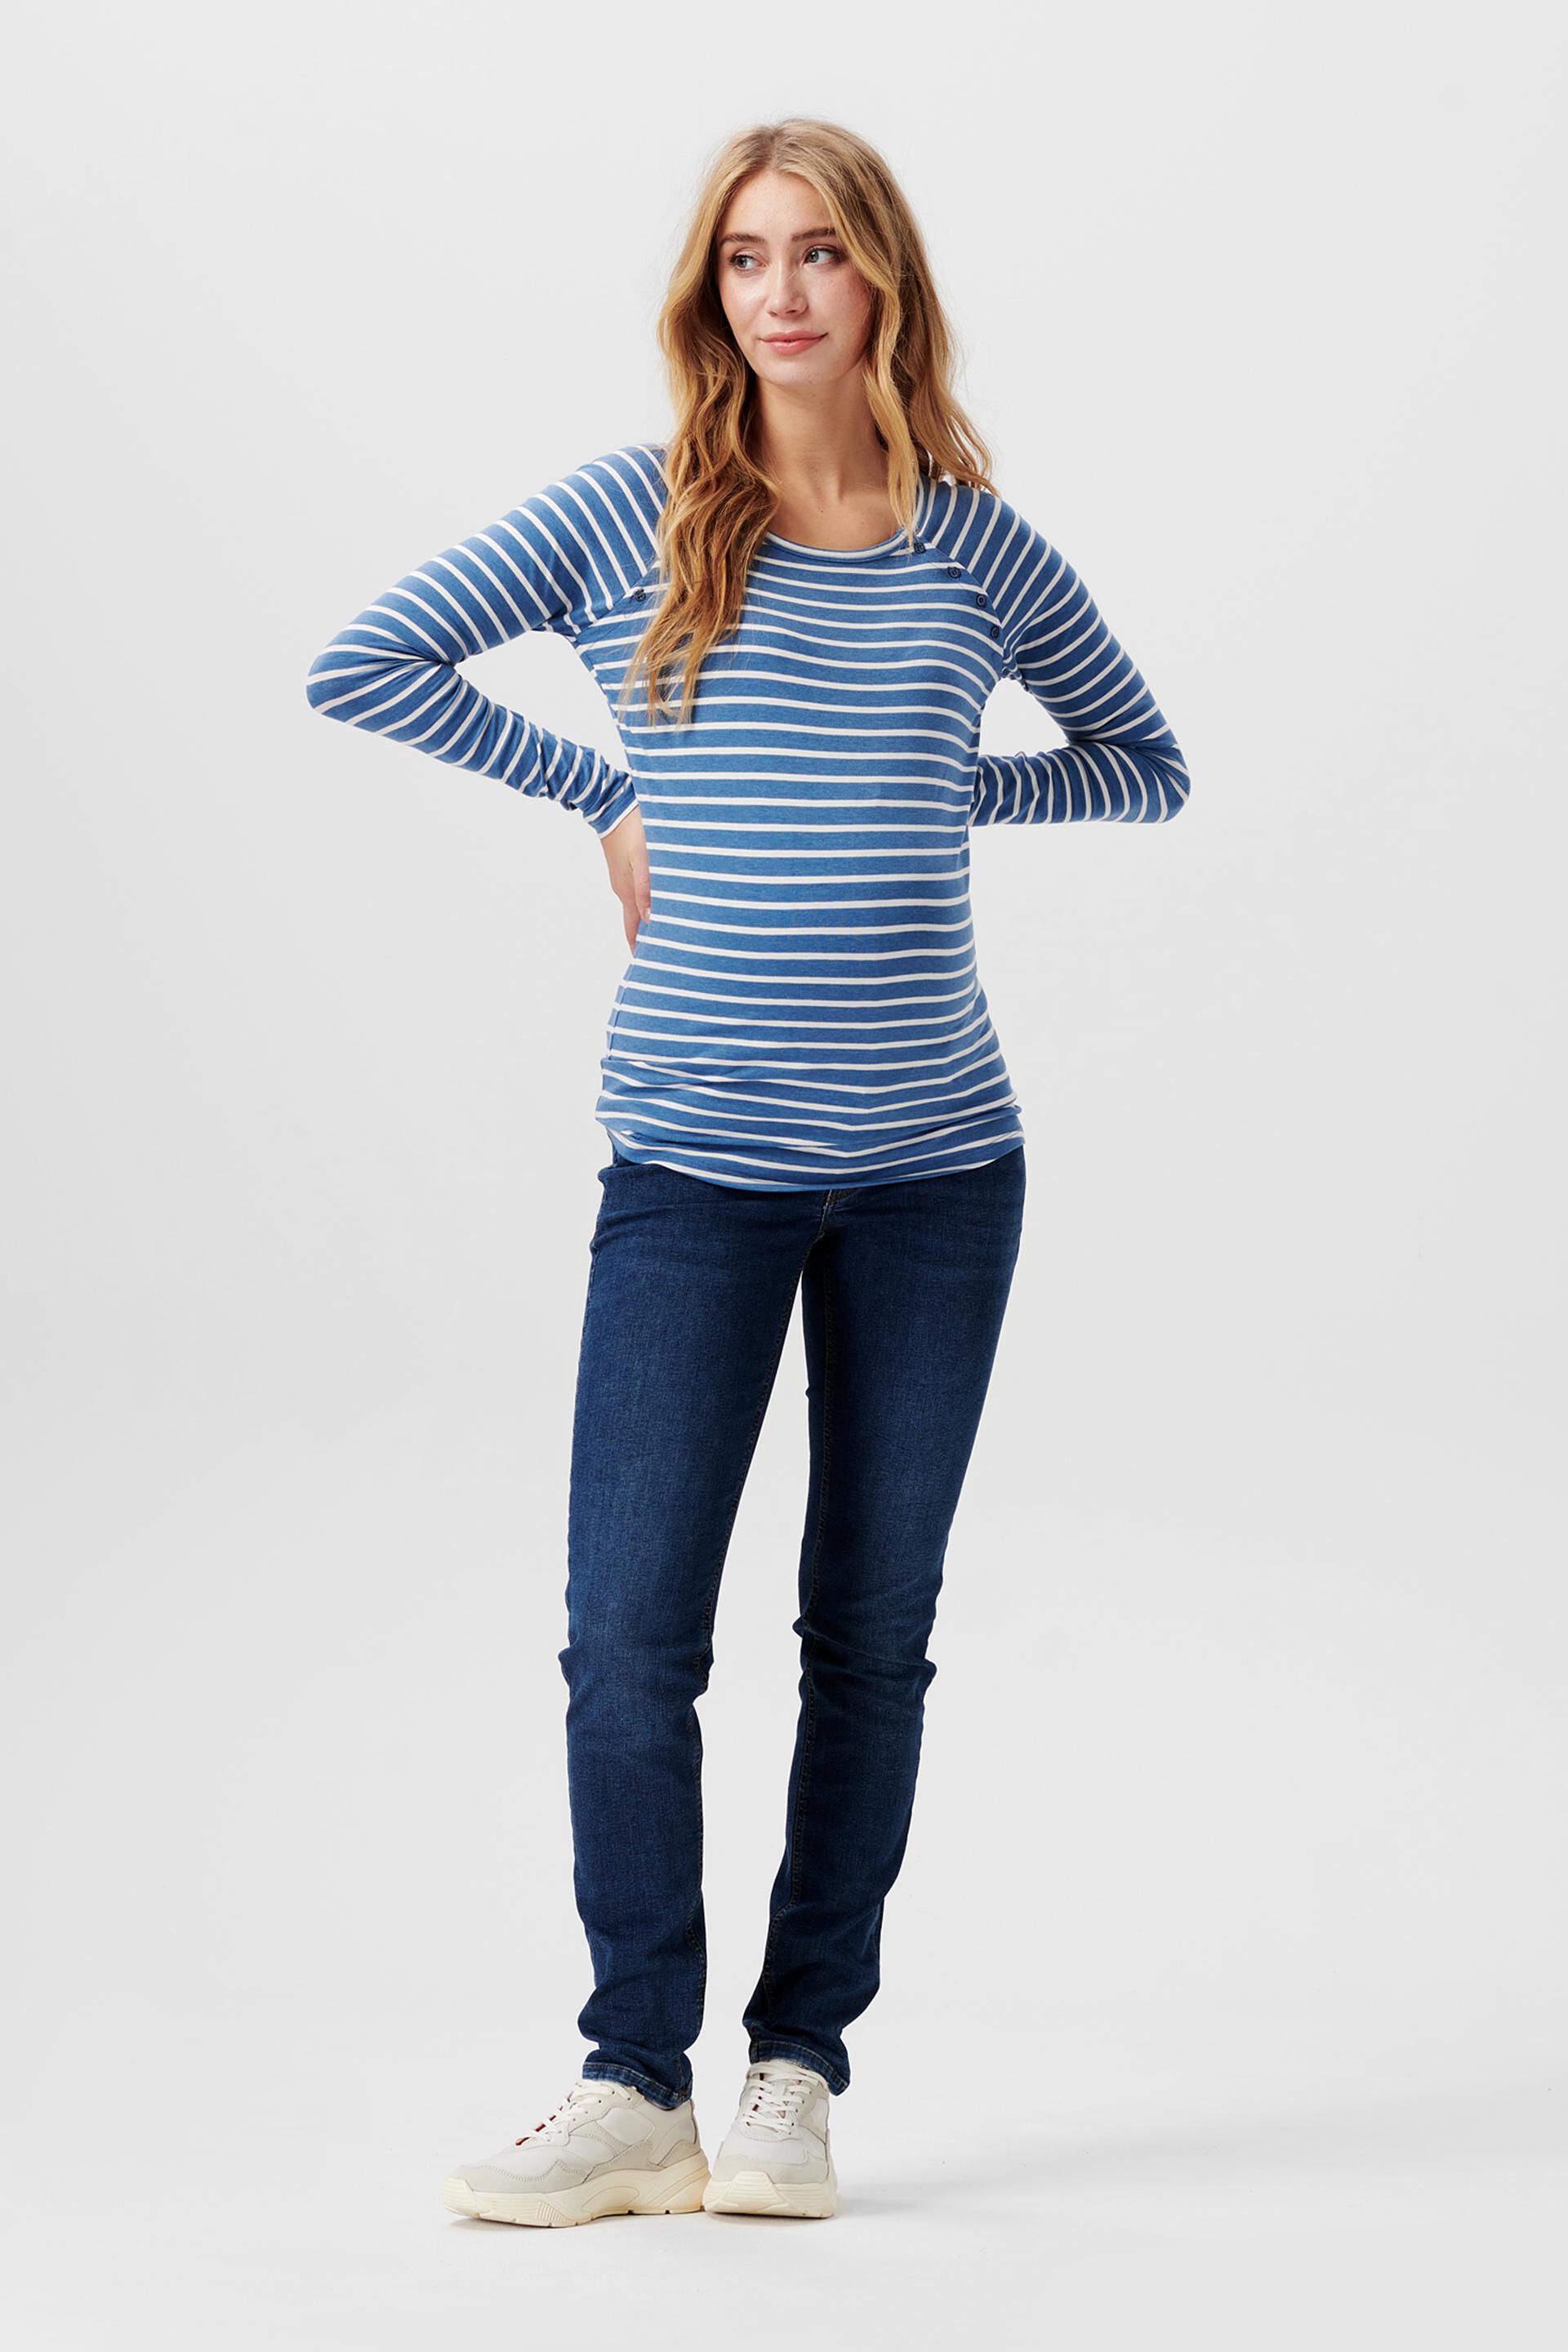 Esprit cotton organic long-sleeved Striped top,